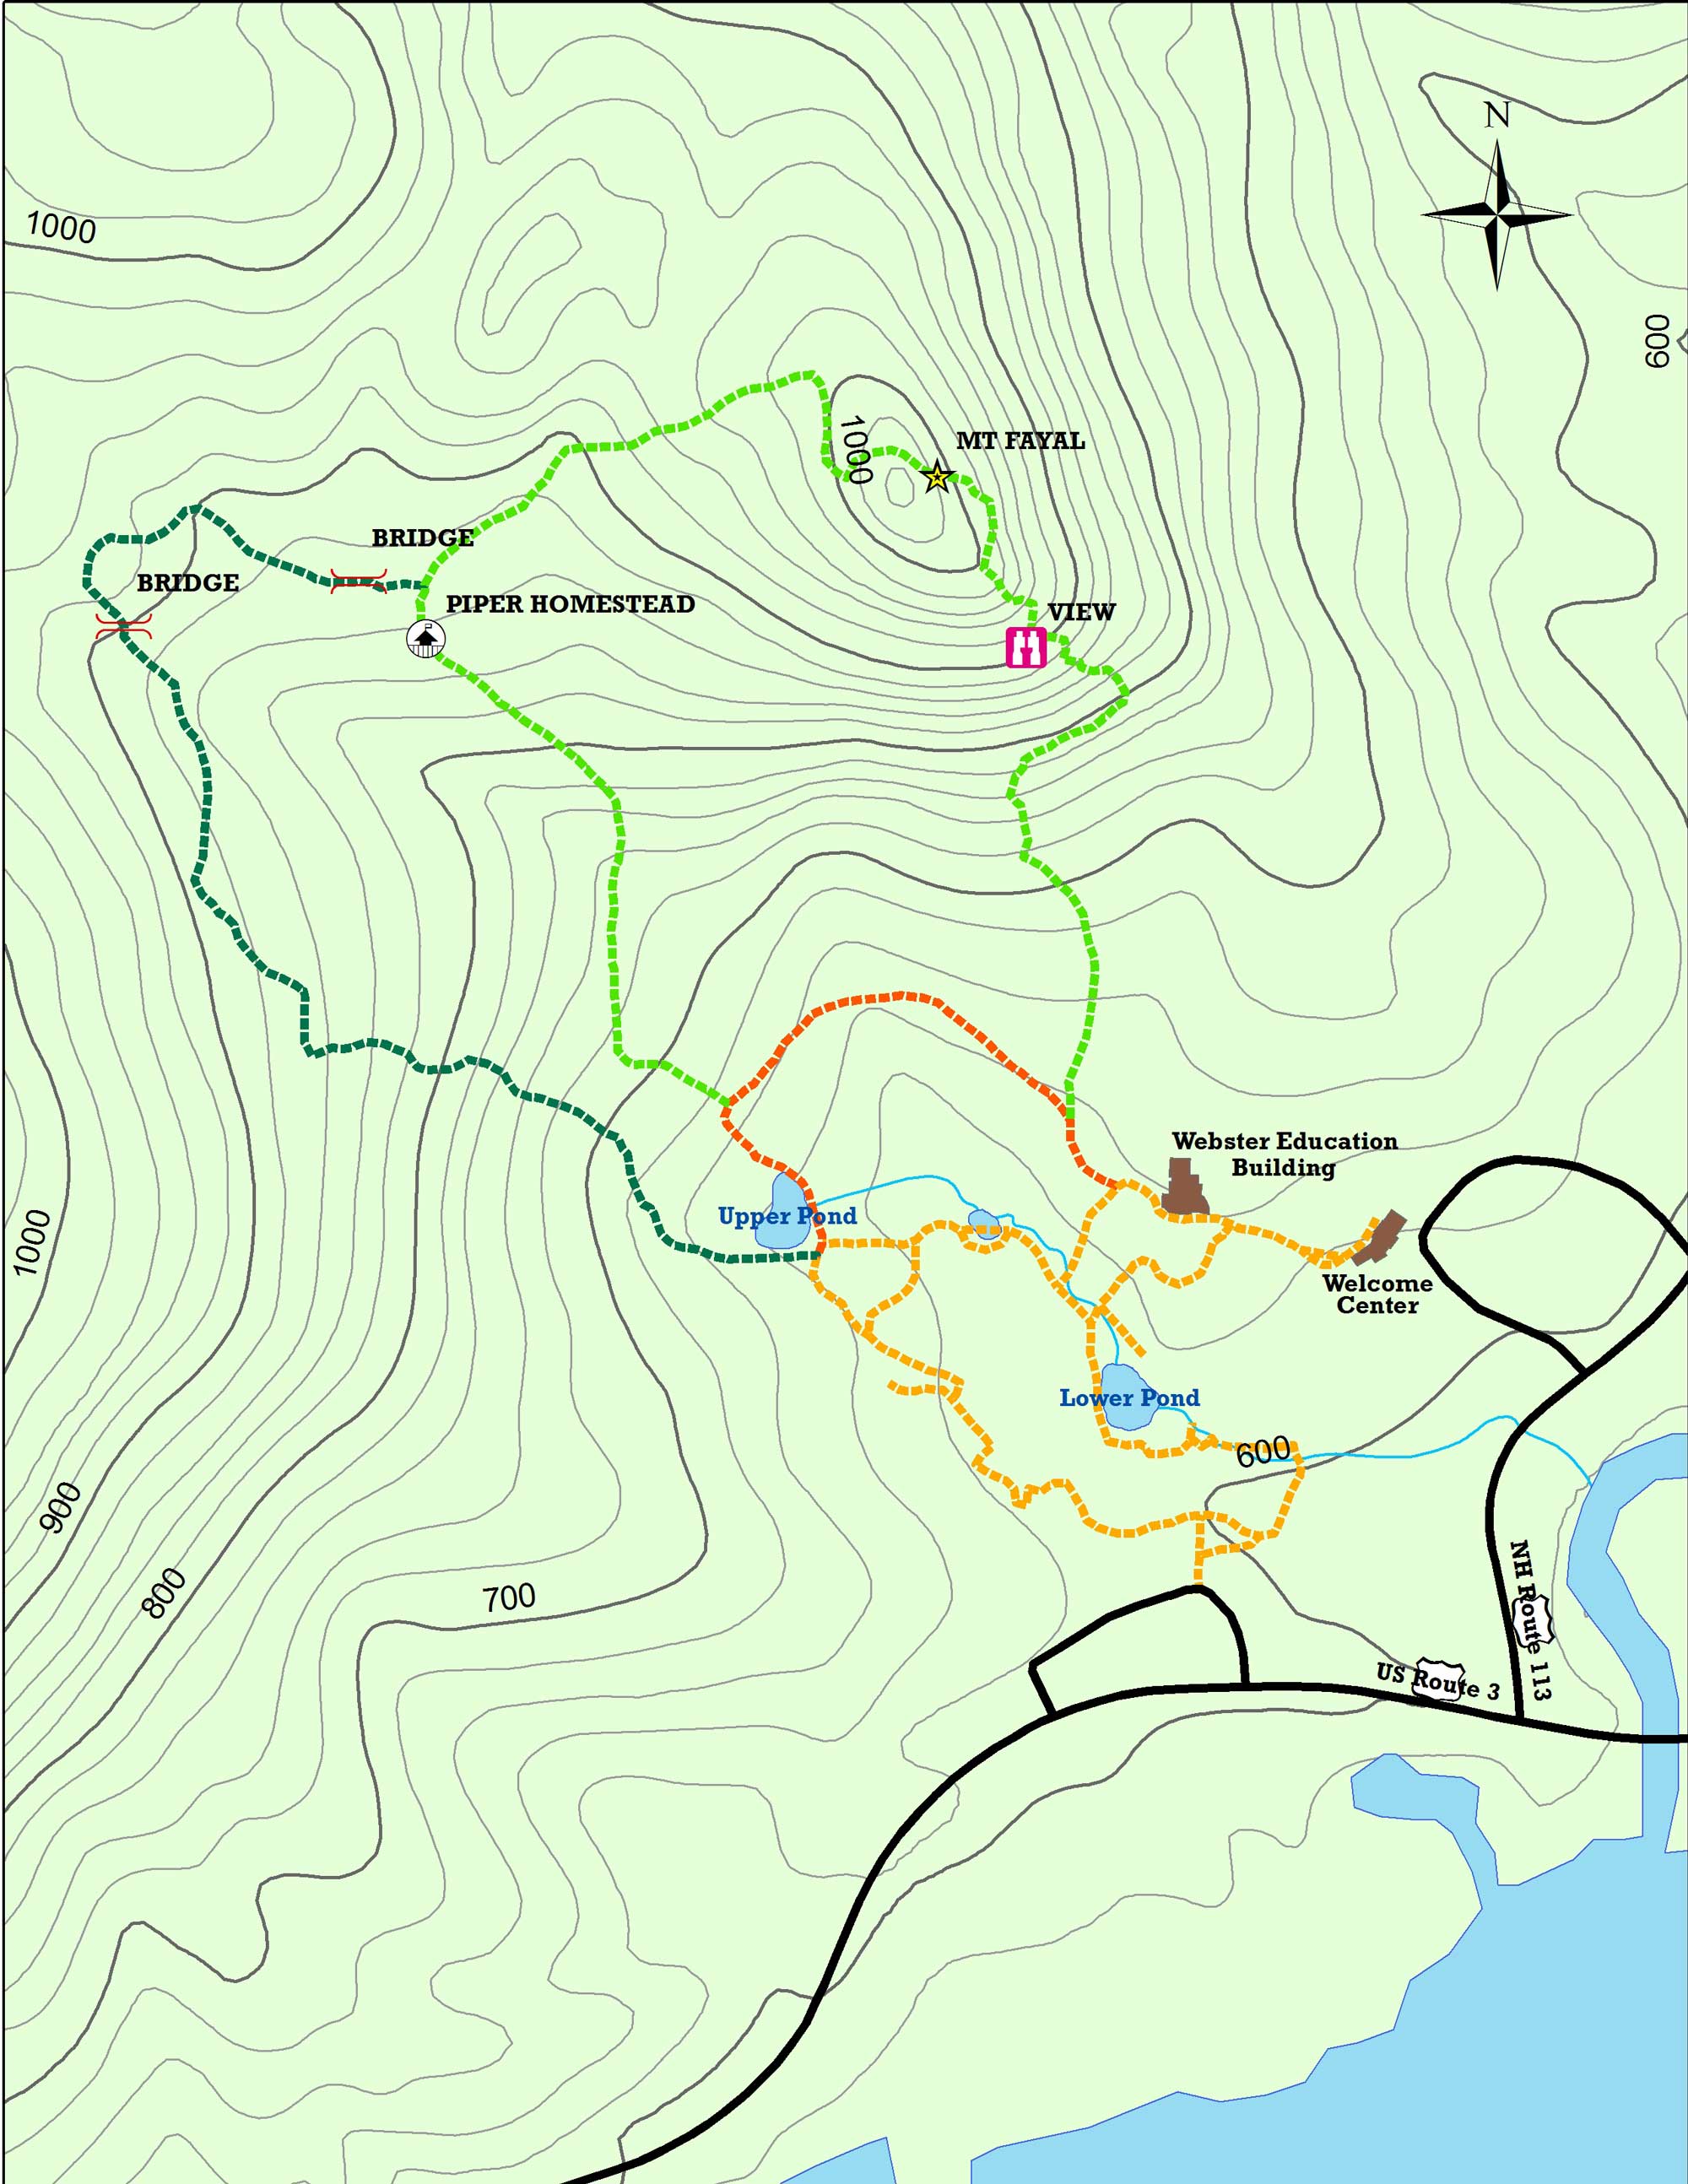 Trail map showing Ecotone, Forest and Mt Fayal trails